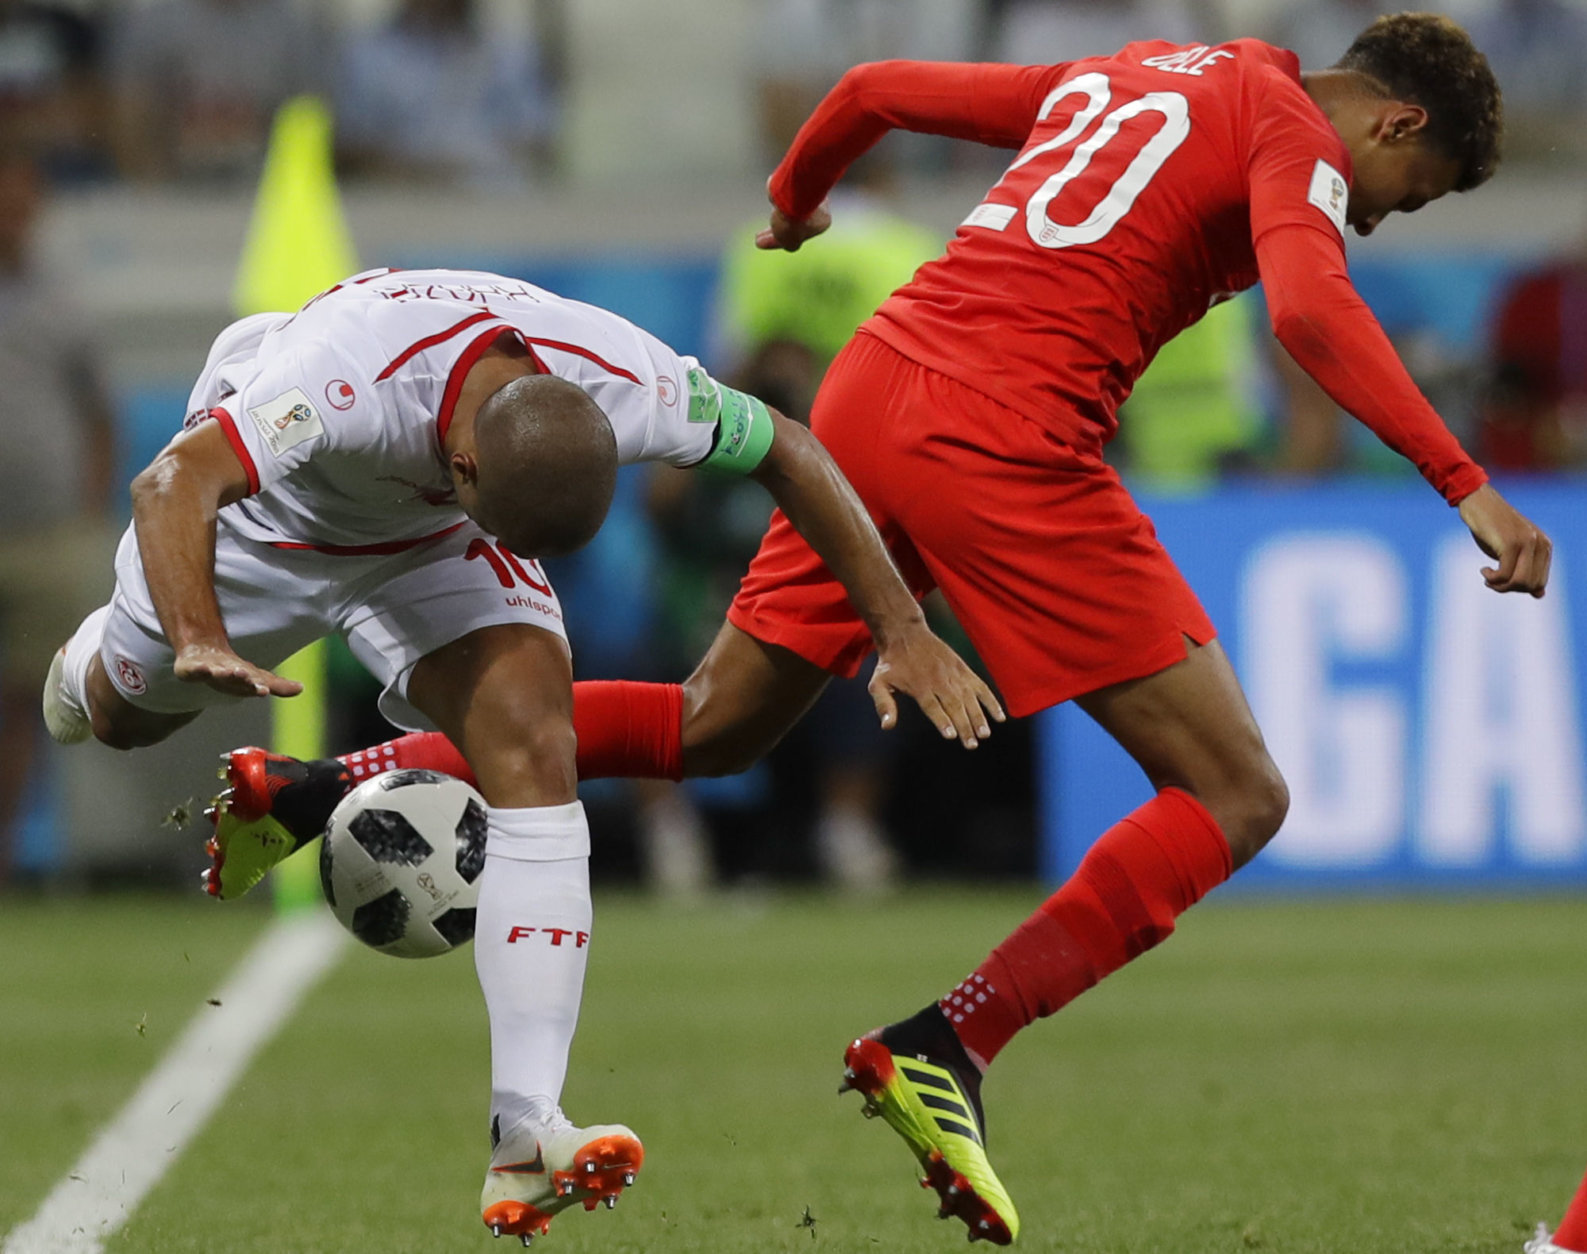 Tunisia's captain Wahbi Khazri, left, and England's Dele Alli compete for the ball during a group G match at the 2018 soccer World Cup in the Volgograd Arena in Volgograd, Russia, Monday, June 18, 2018. (AP Photo/Alastair Grant)